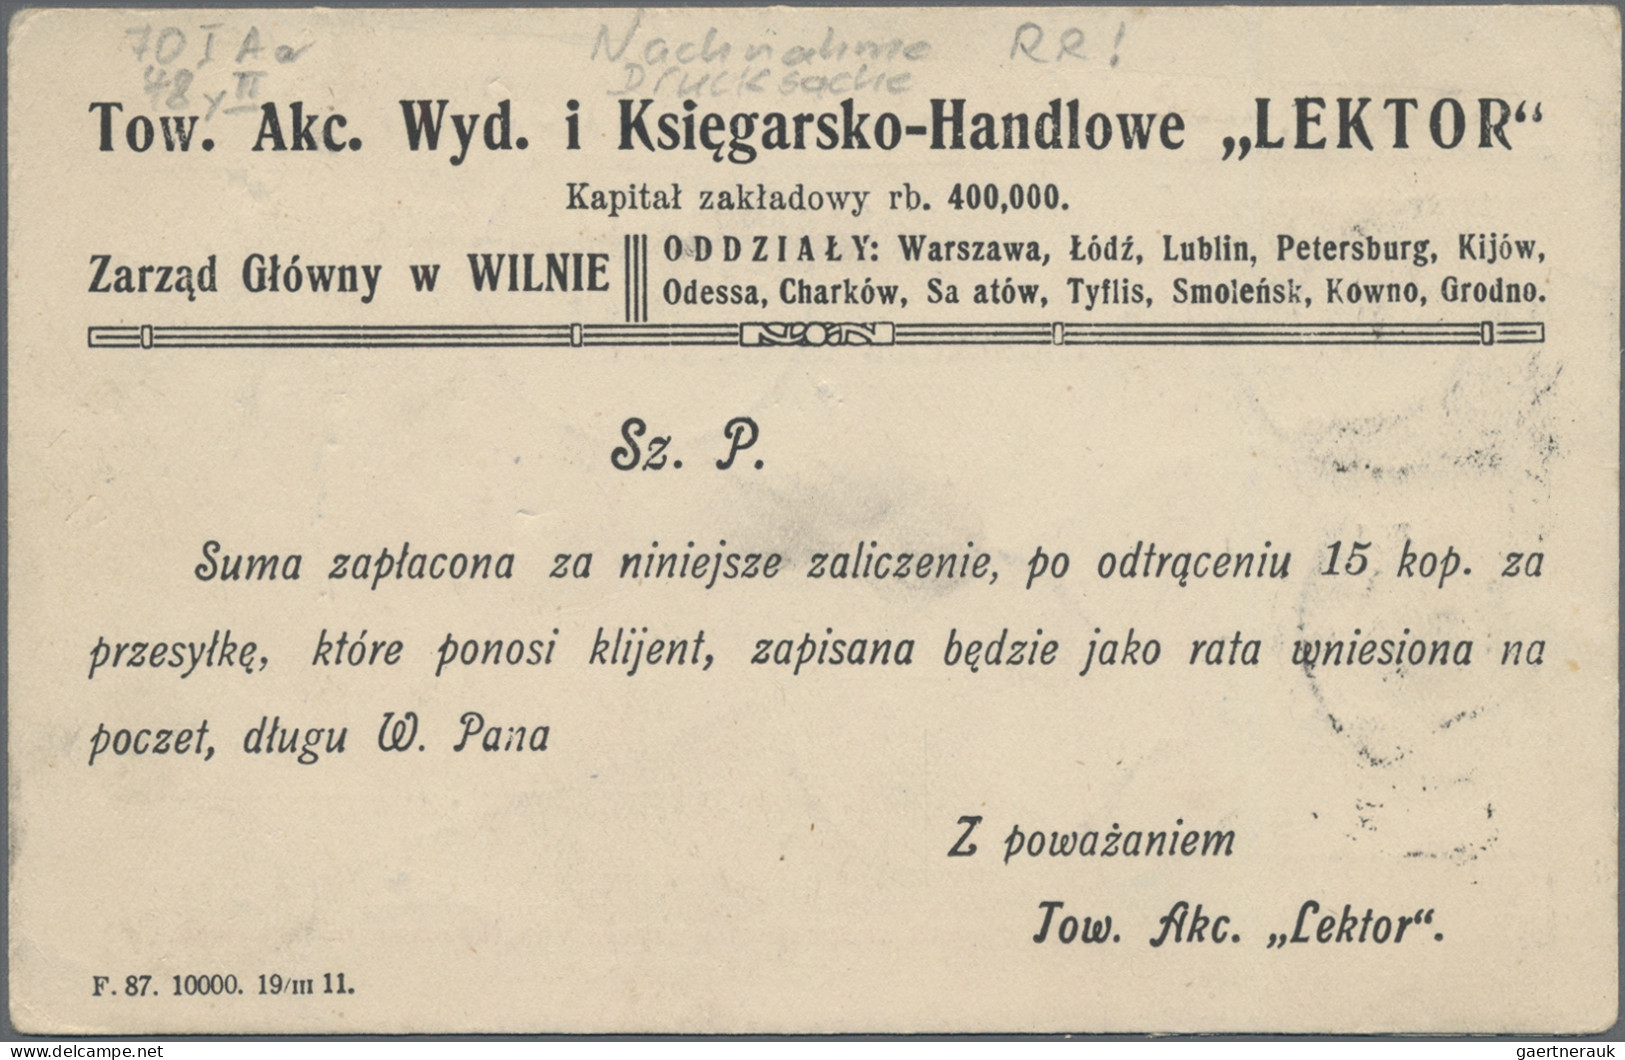 Russia: 1911 Registered C.O.D. Card From Vilna To Gorolyshe, Kiev Franked 1908 5 - Covers & Documents